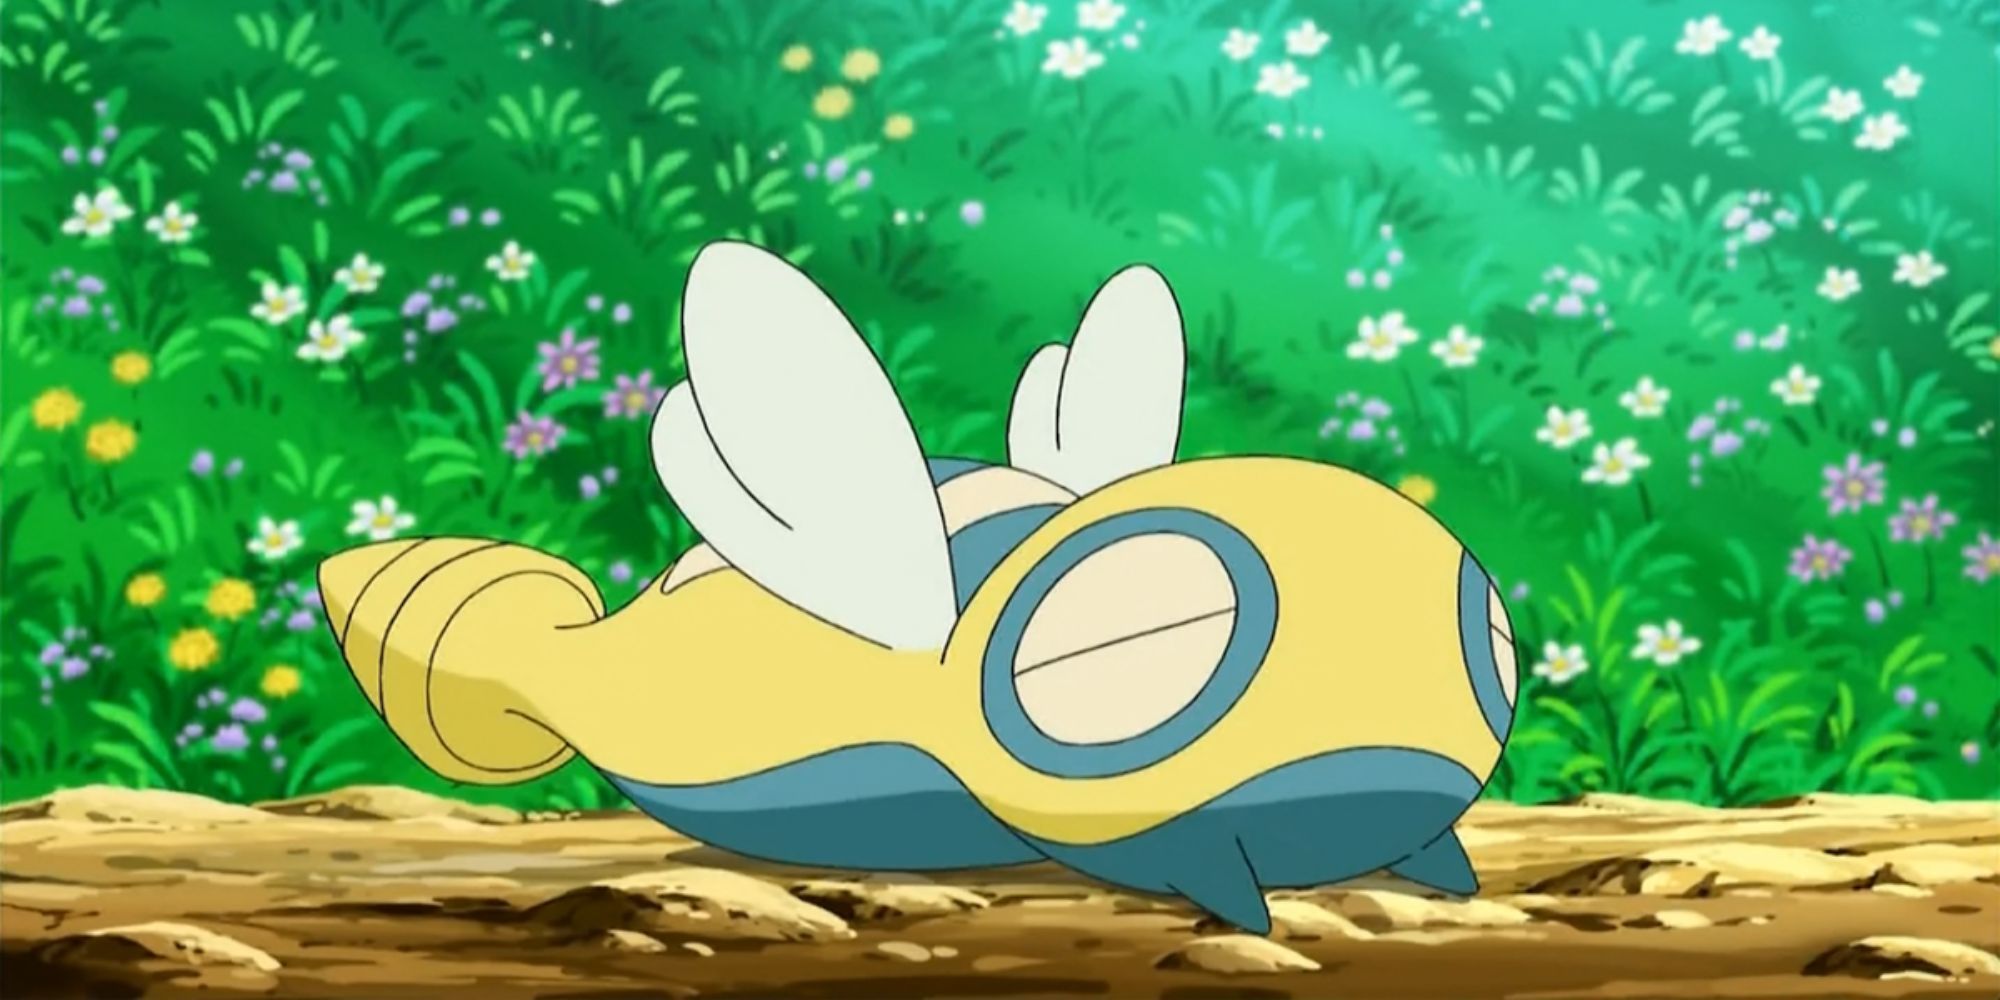 A wild Dunsparce in the Pokemon anime.